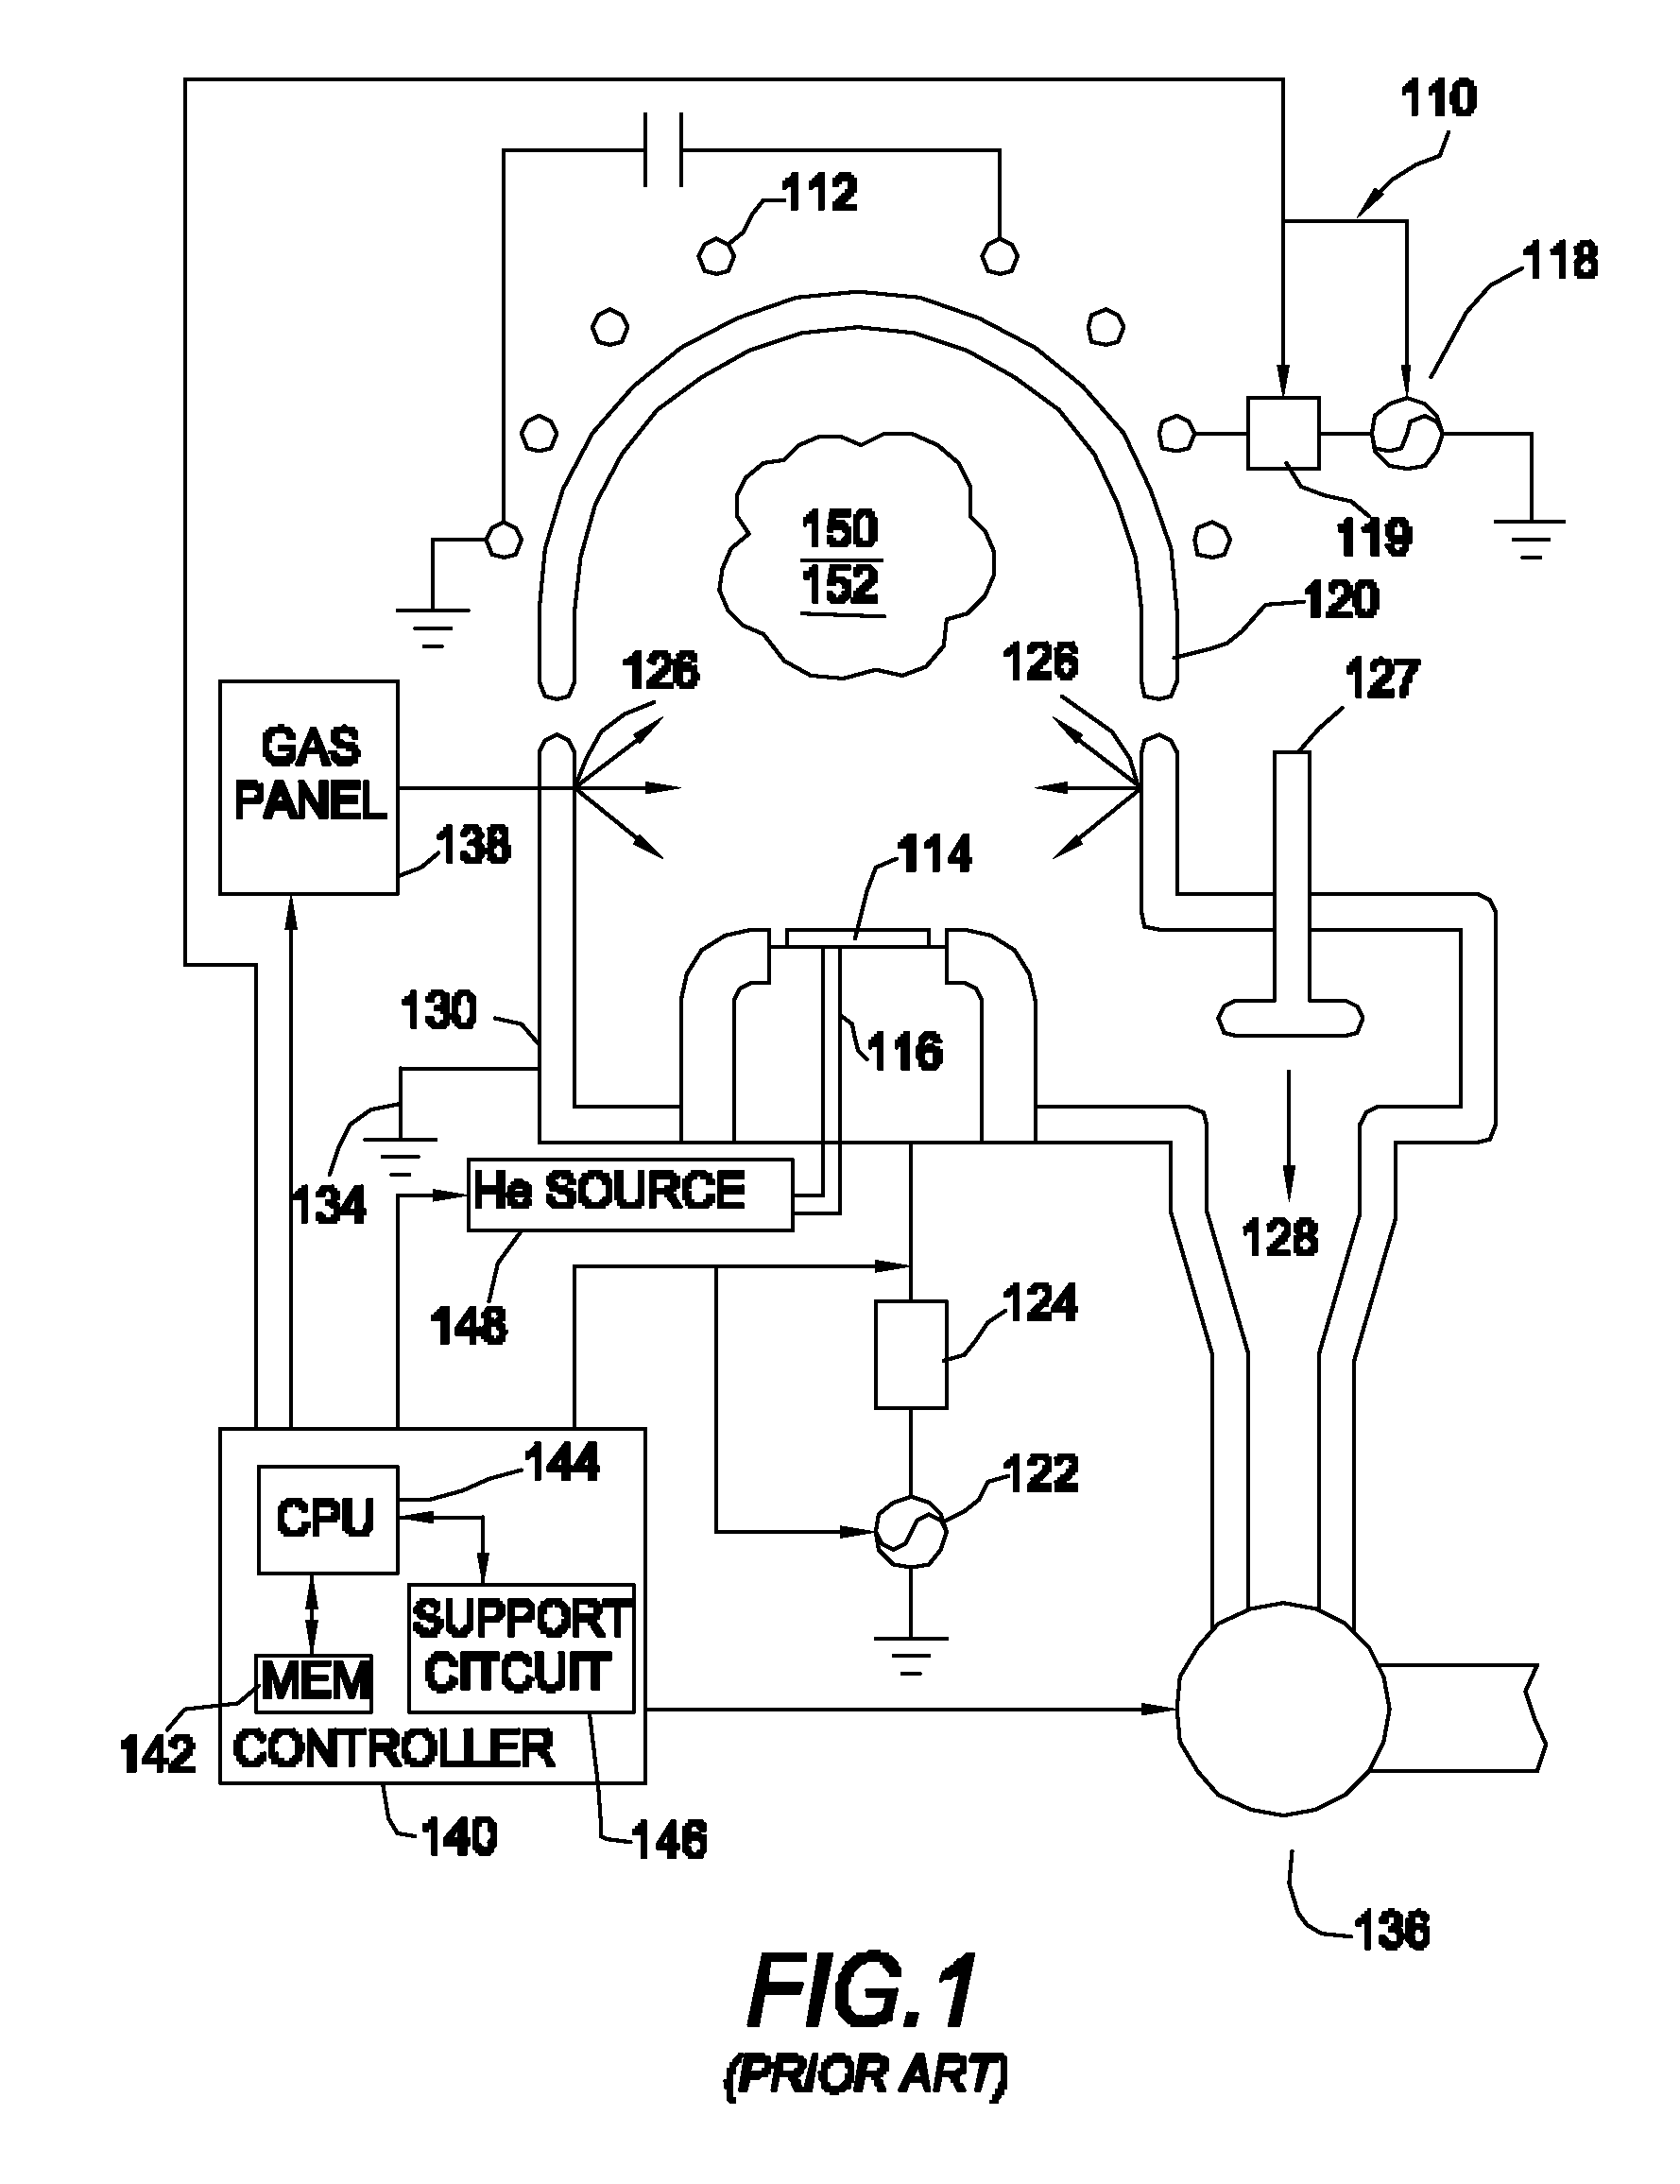 Method of plasma etching of high-k dielectric materials